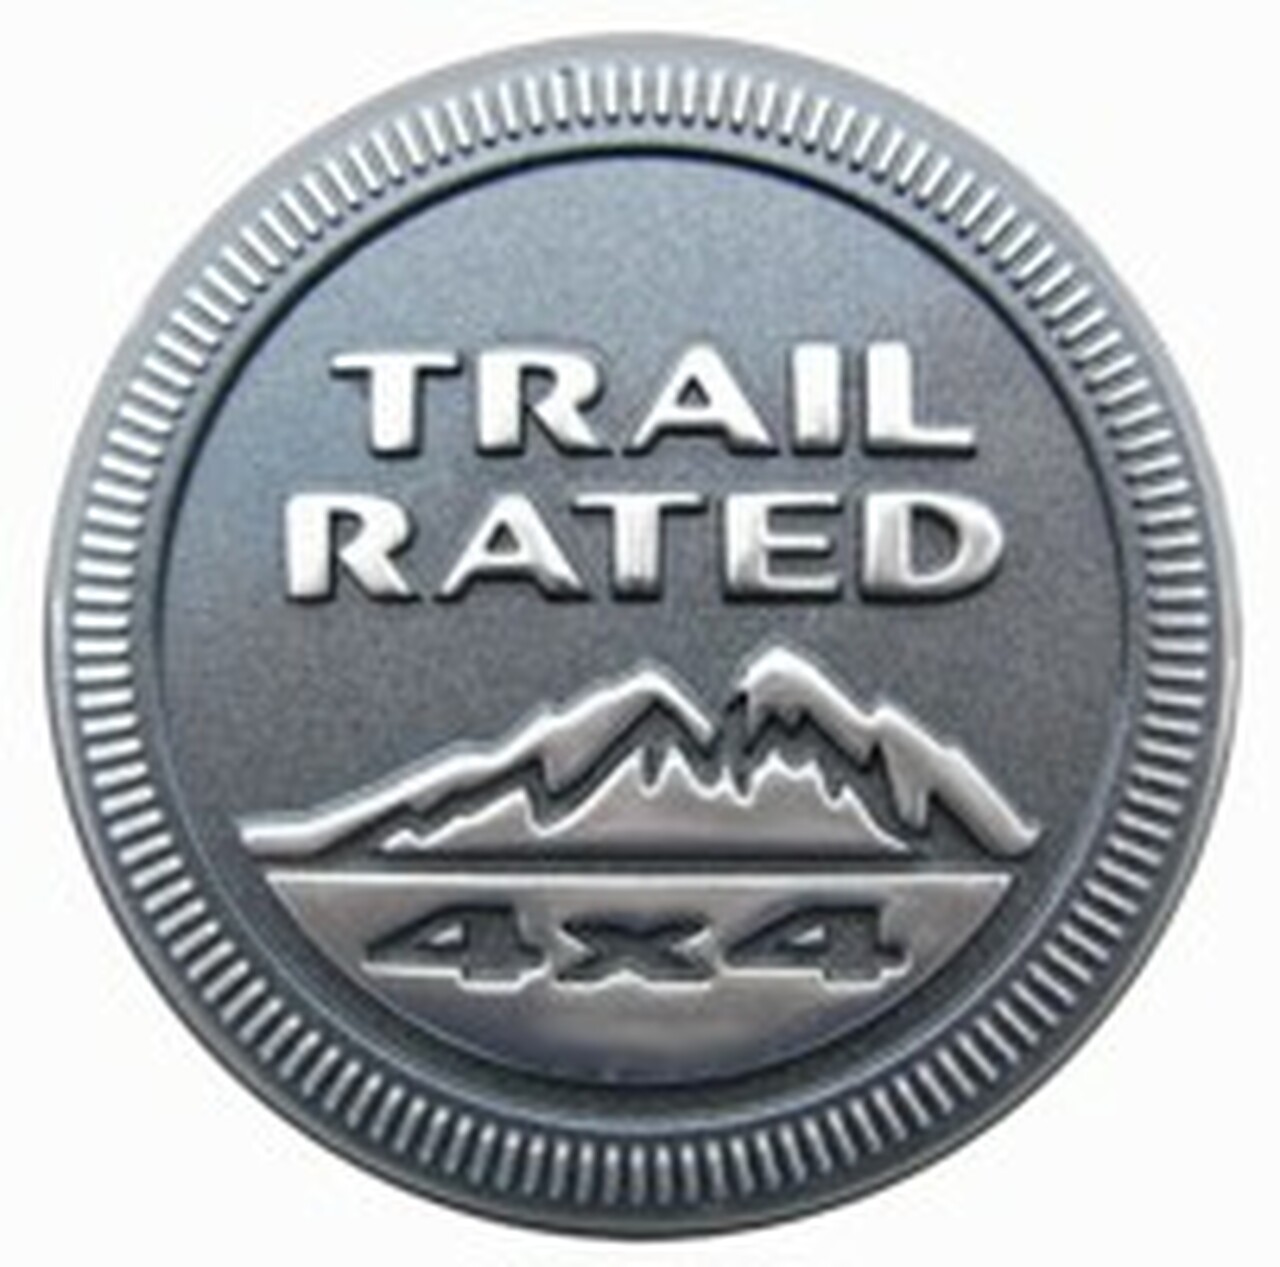 trail-rated-badge-decal-98__67176.1645123357.jpg